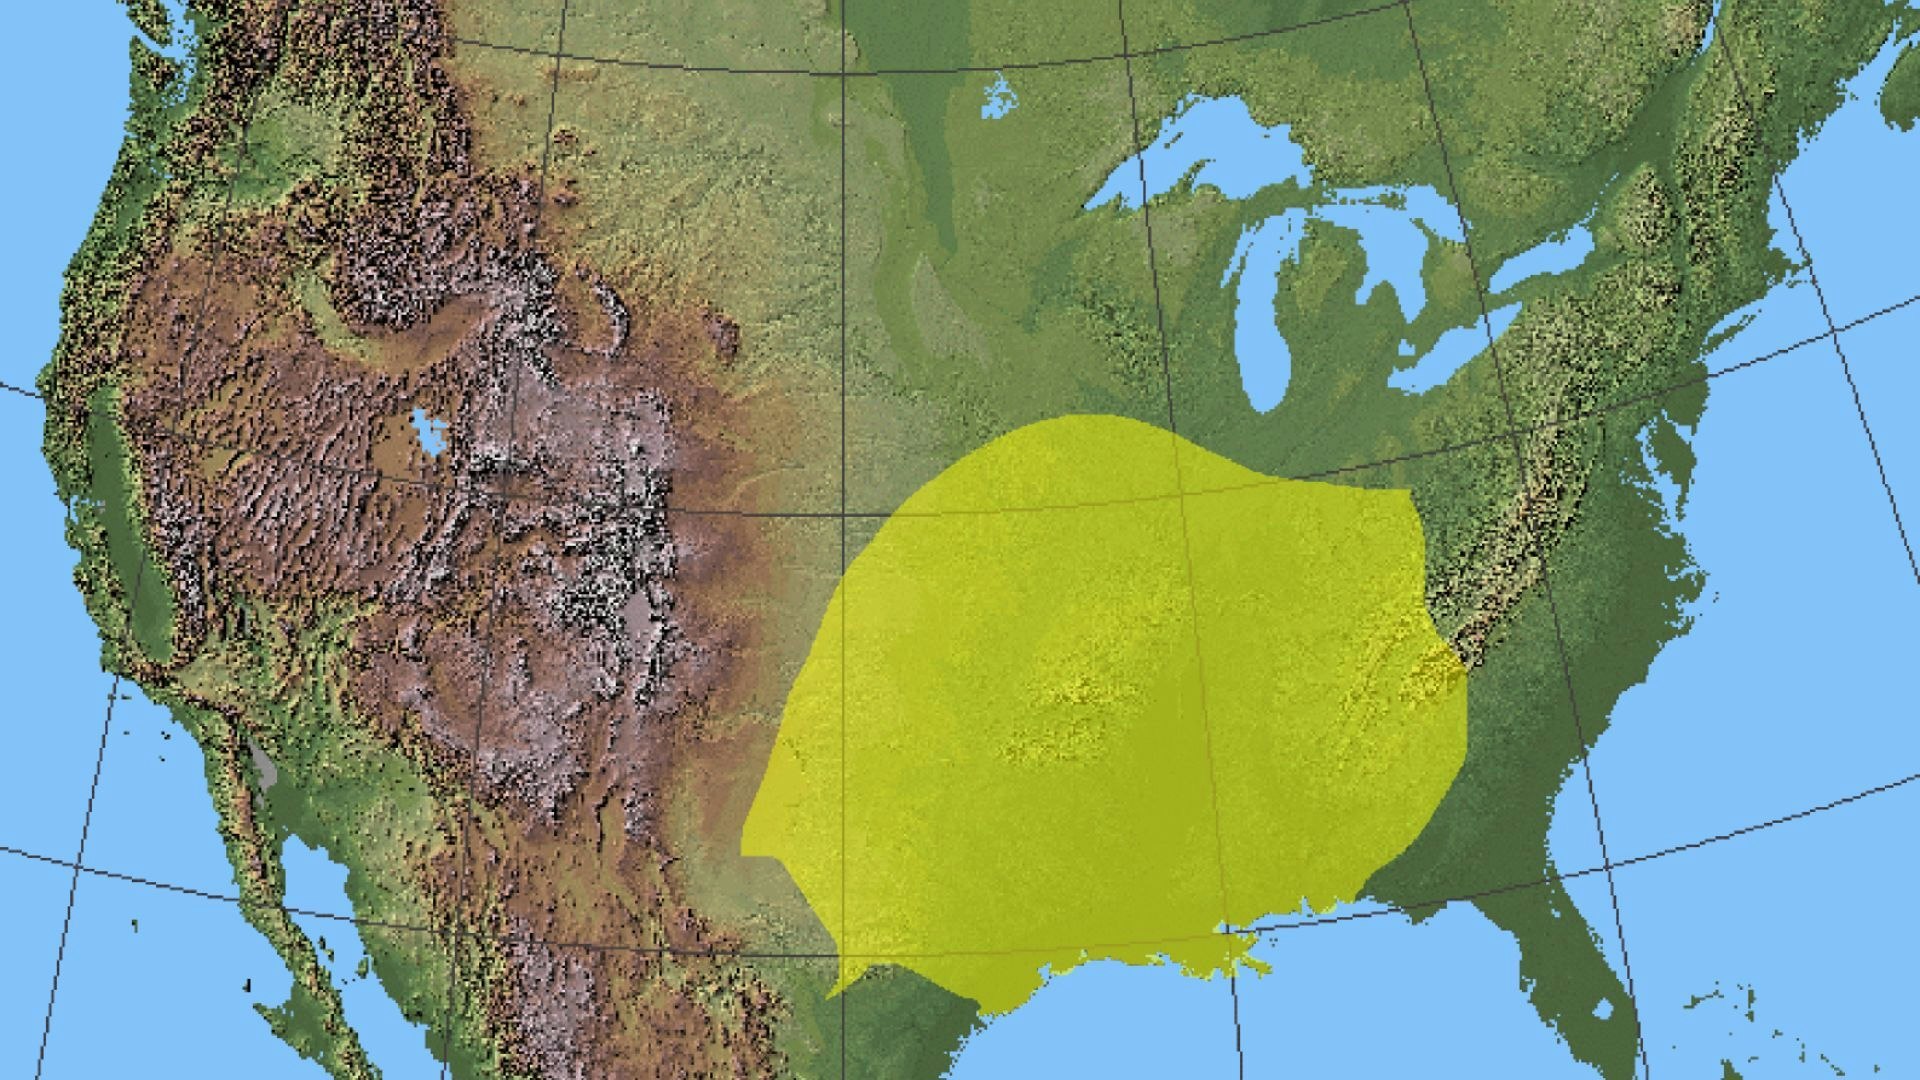 The yellow highlight shows the optimal range for brown recluse spiders in the United States.